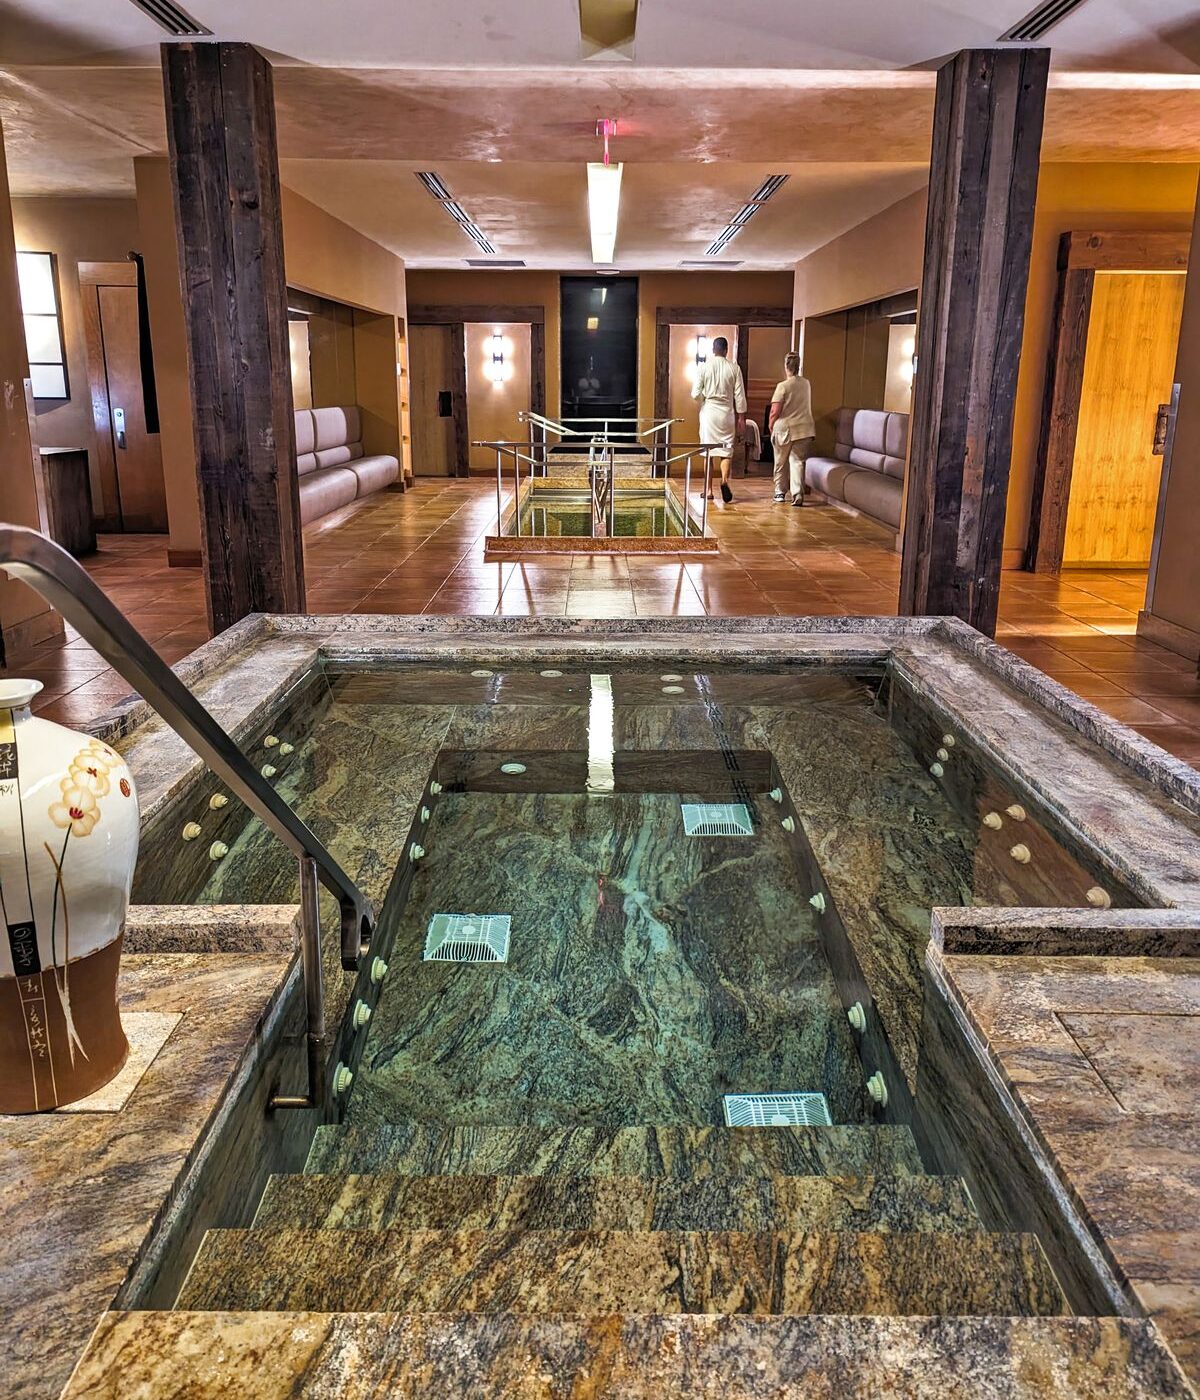 The hot tub and cold plunge at Woodlands Spa